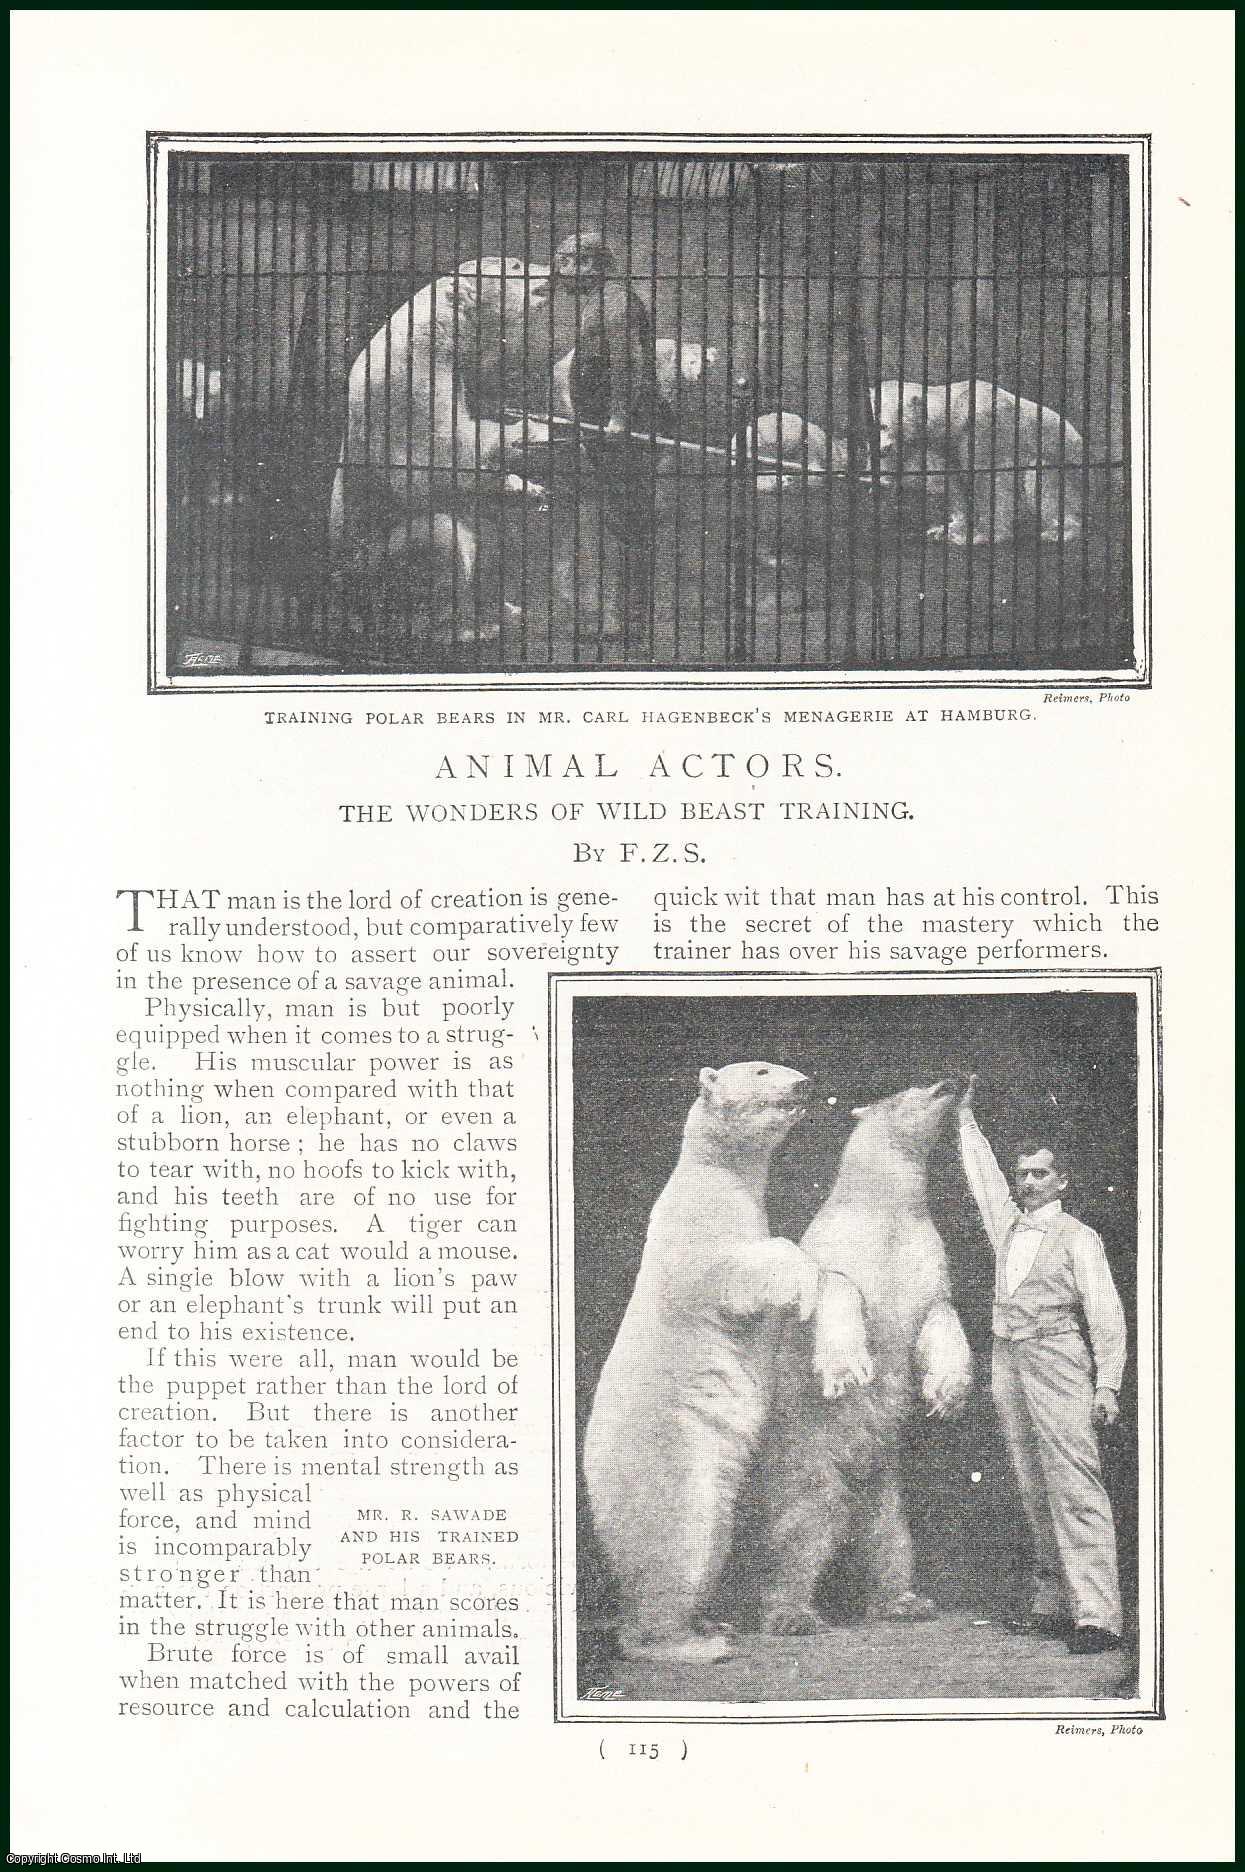 F.Z.S. - Mademoiselle Heliot ; H.M. King Leo ; Mr. Carl Hagenbeck : Animal Actors. The Wonders of Wild Beast Training. An uncommon original article from the Harmsworth London Magazine, 1901.